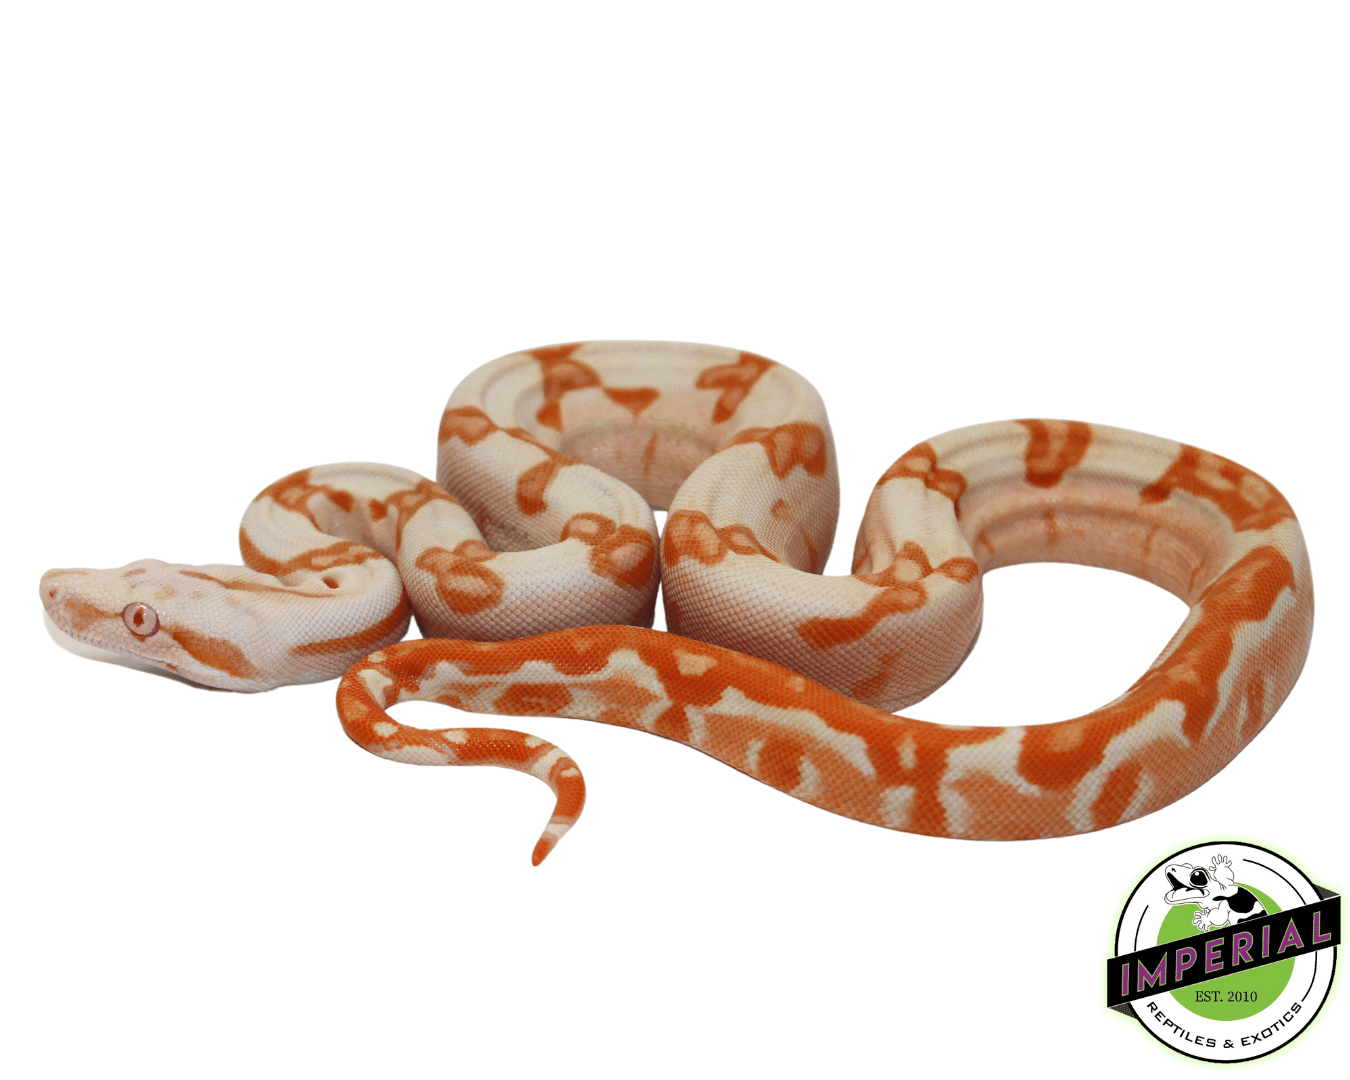 sunglow boas for sale, buy reptiles online